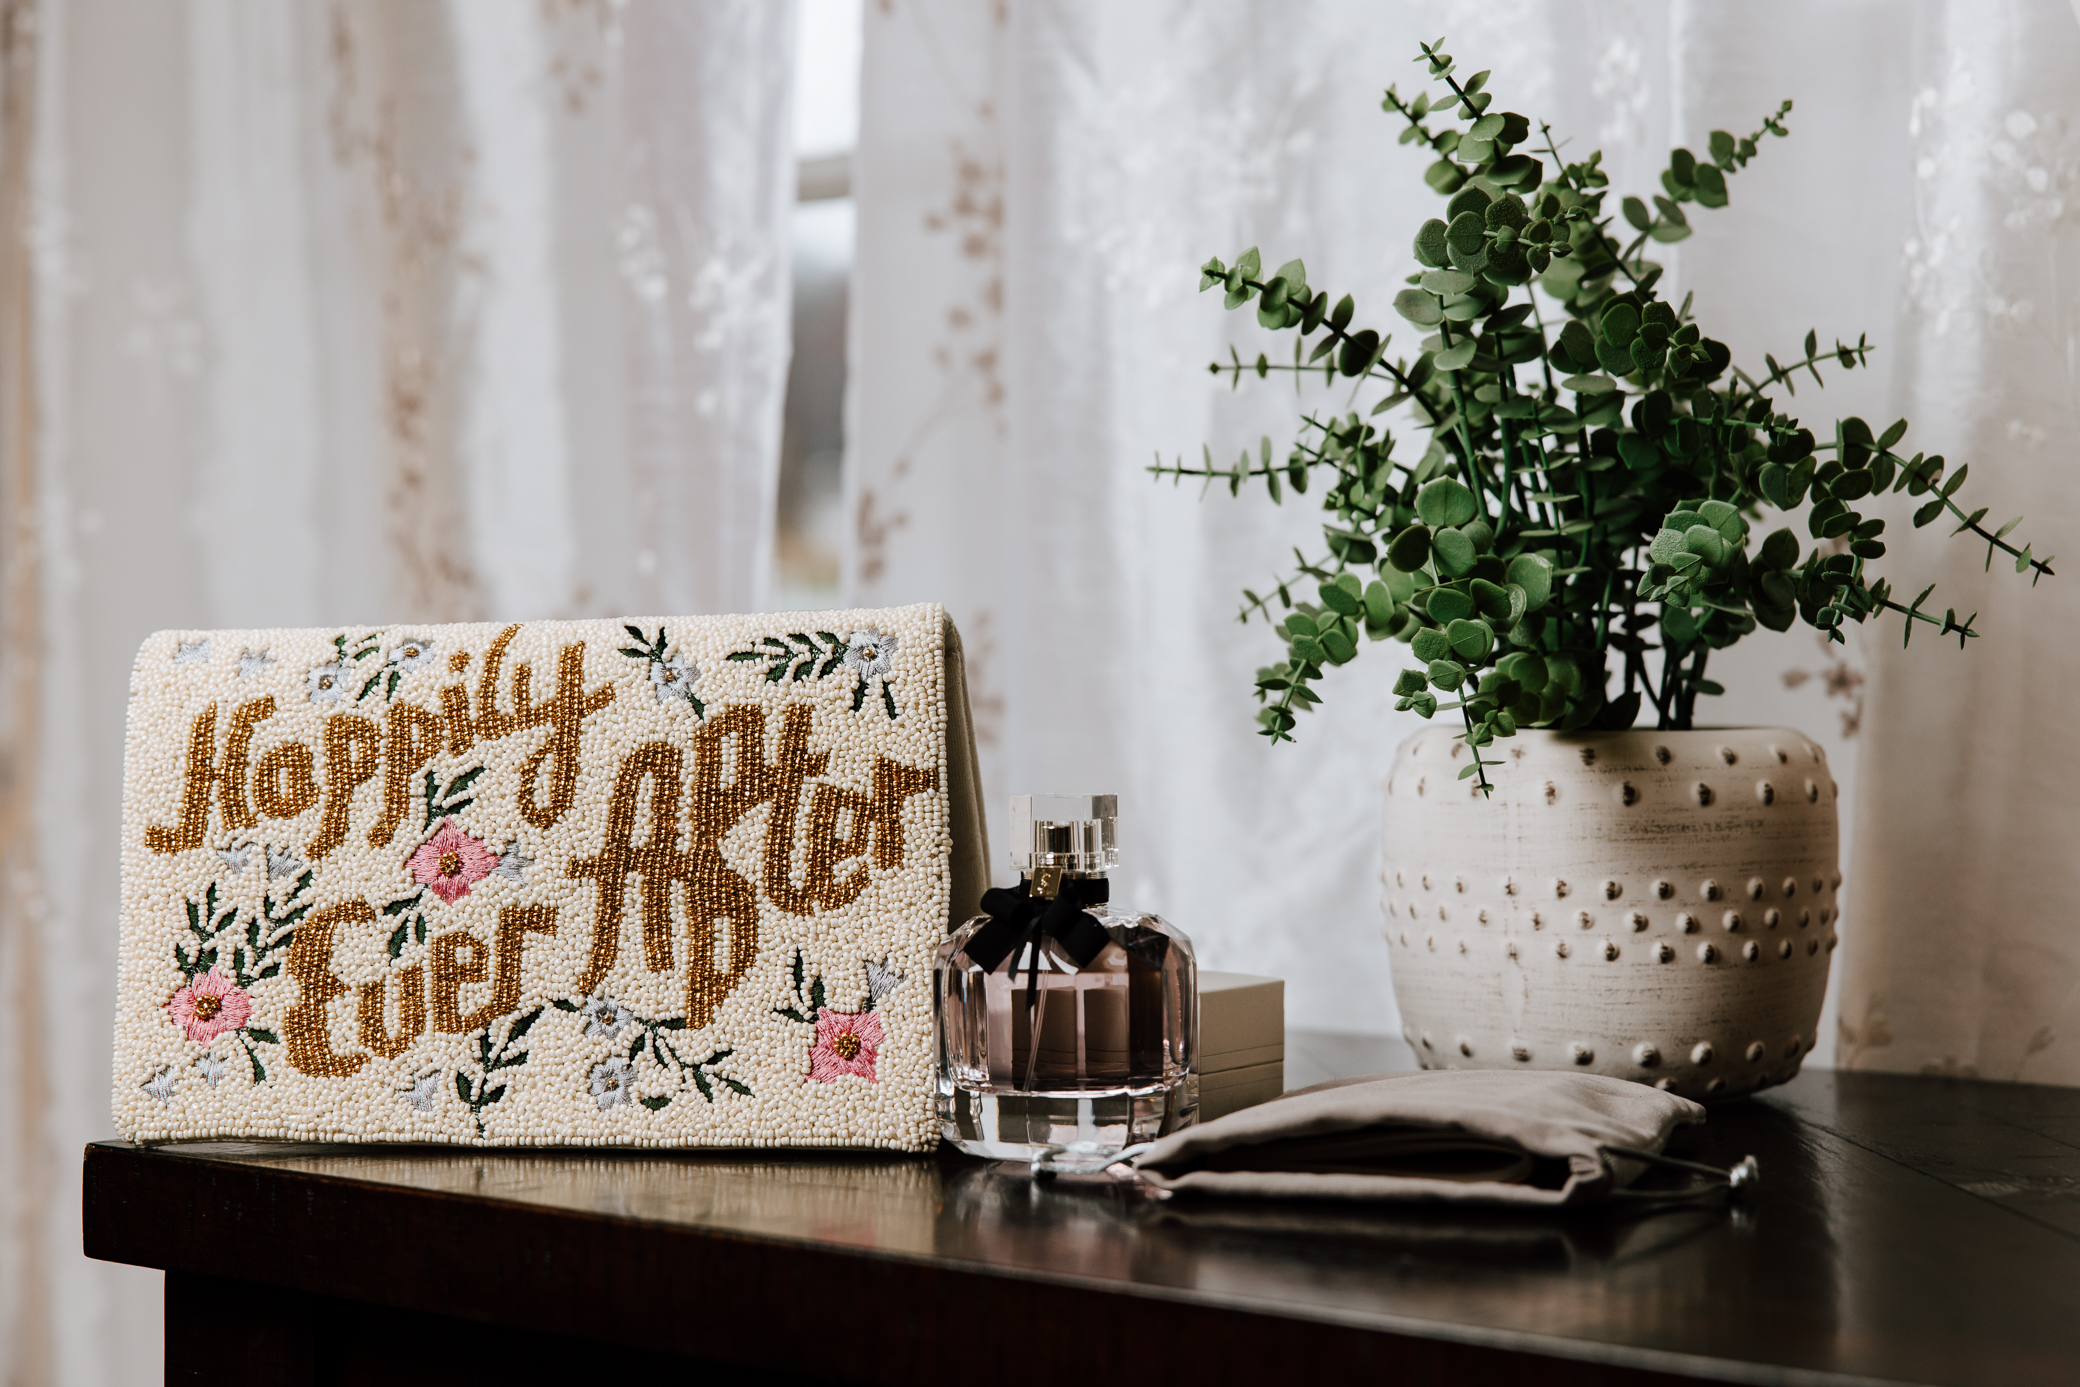 A beaded clutch that reads "happily ever after" is sitting on a table in the bridal suite at Knotting Hills in Pevely, Missouri along with a pink bottle of Yves Saint Laurent Mon Paris perfume and a decorative plant in a white pot.